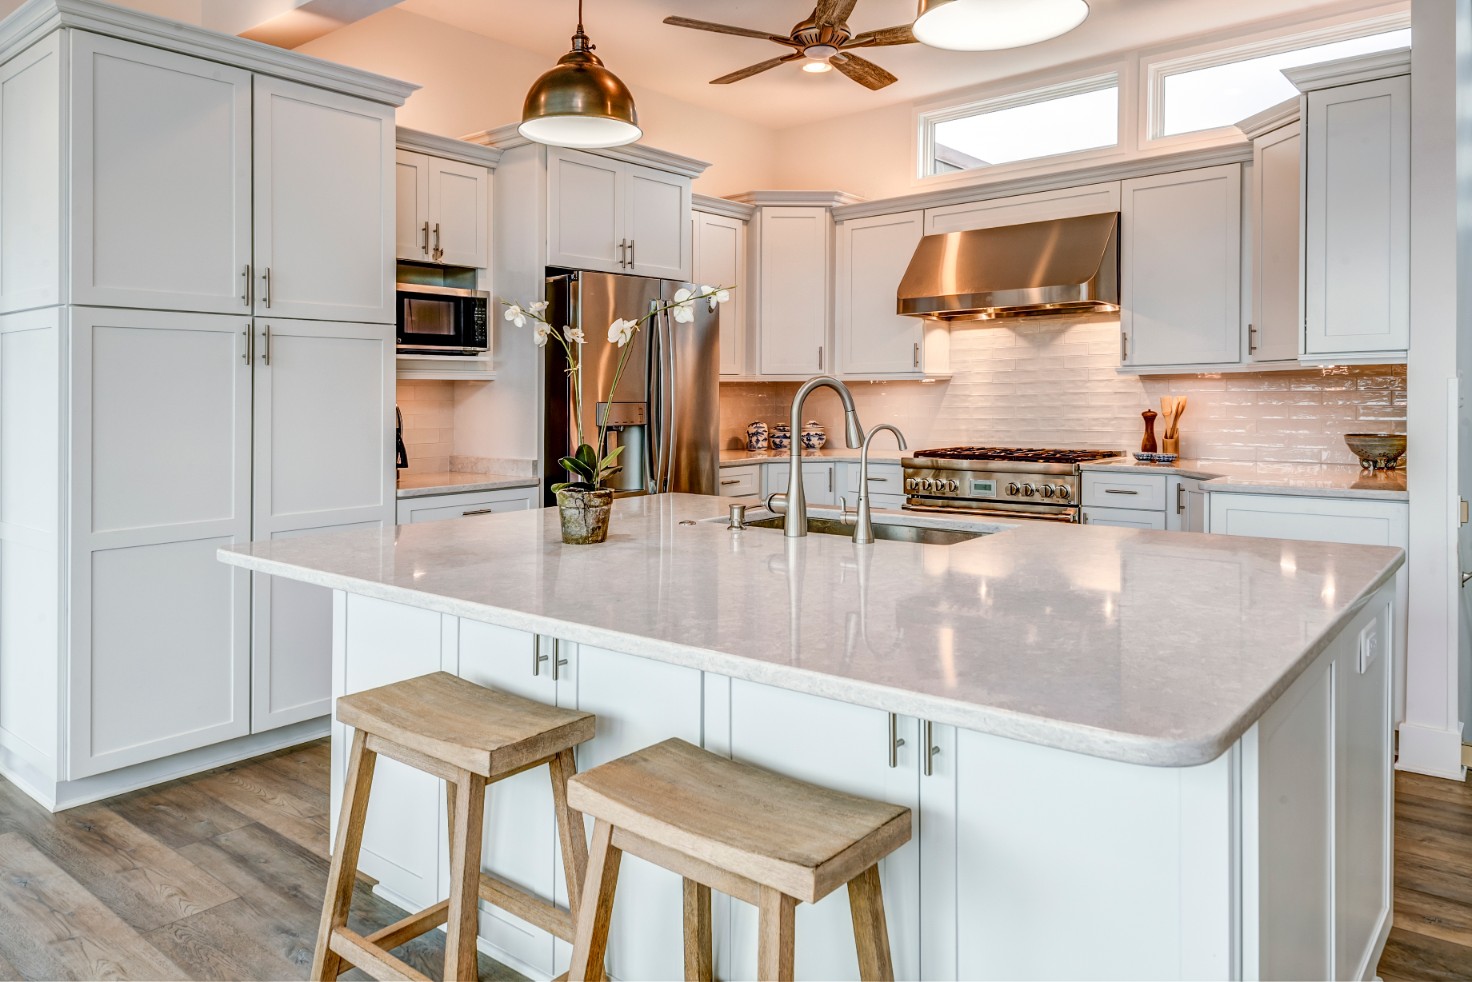 Cotton Patch Hills Renovation in Bethany Beach DE - Kitchen with White Vanities and Island with White Countertop